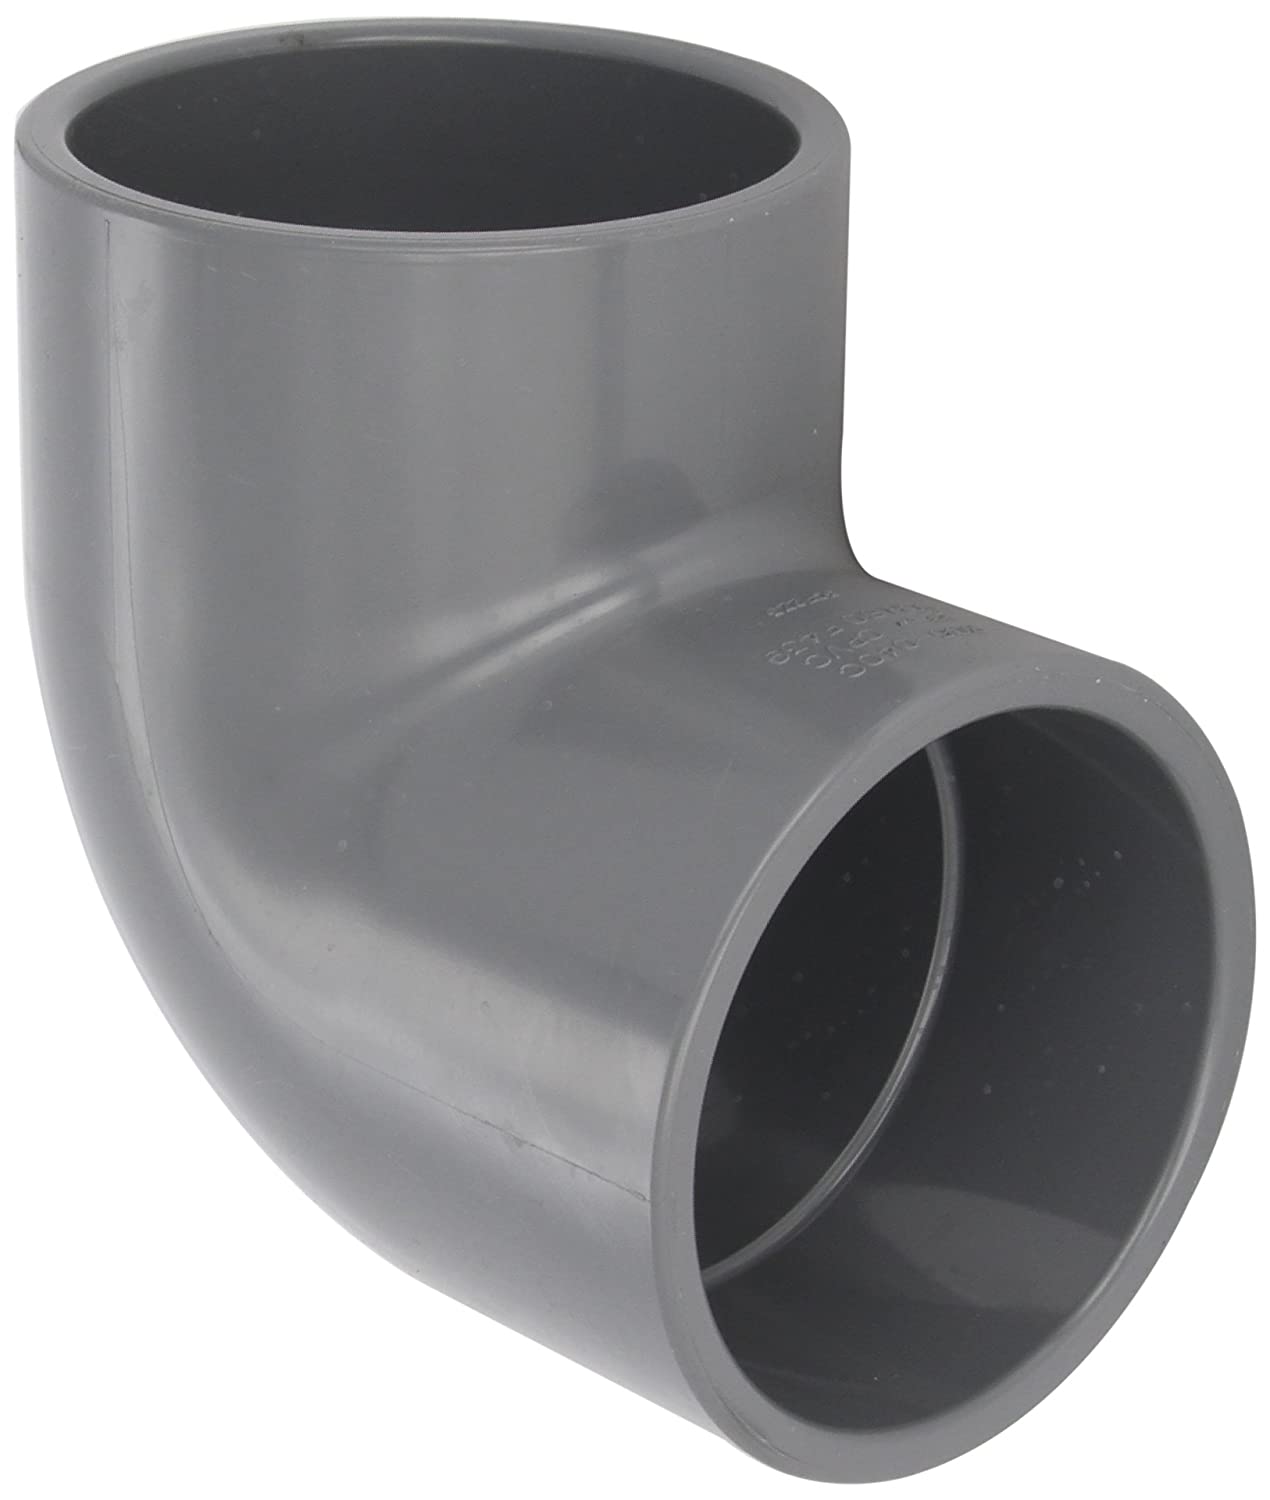 Spears 806-005C - CPVC Pipe Fitting, 90 Degree Elbow, Schedule 80, 1/2" Socket